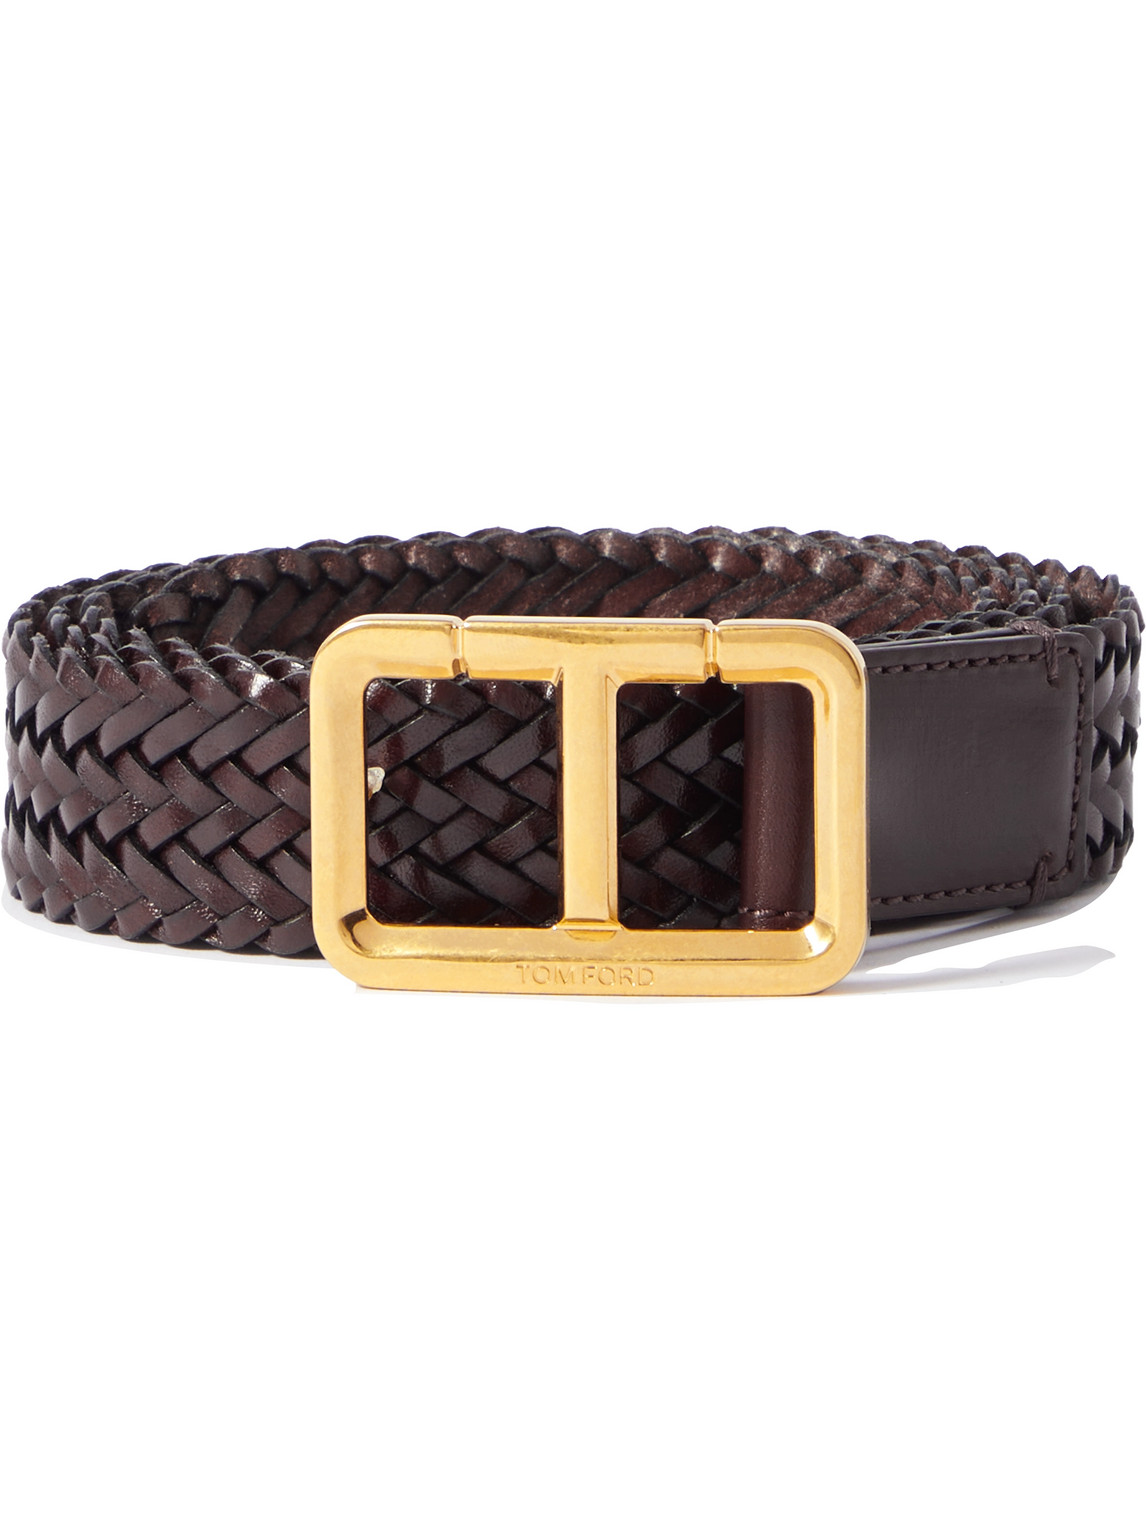 TOM FORD 3CM WOVEN LEATHER BELT